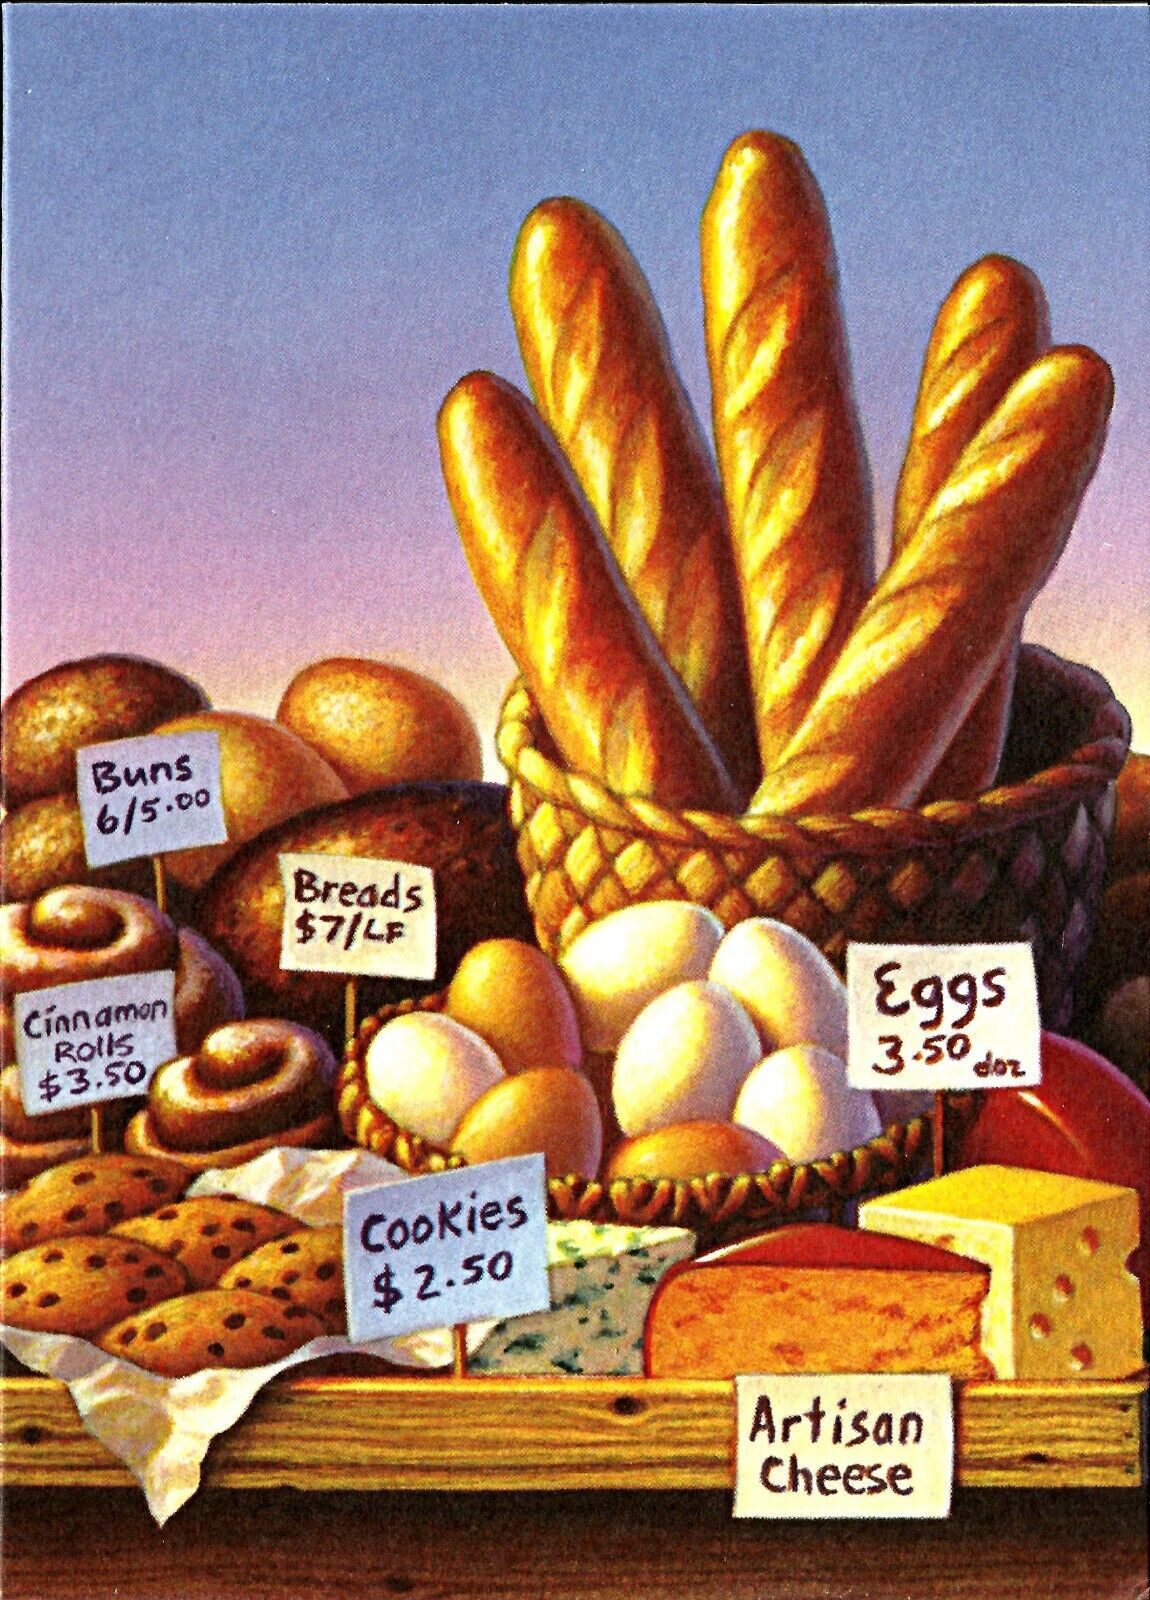 BREADS FARMERS MARKETS NOTE CARD # shopping ART Spasm price OF 4 1 BEAUTIFUL